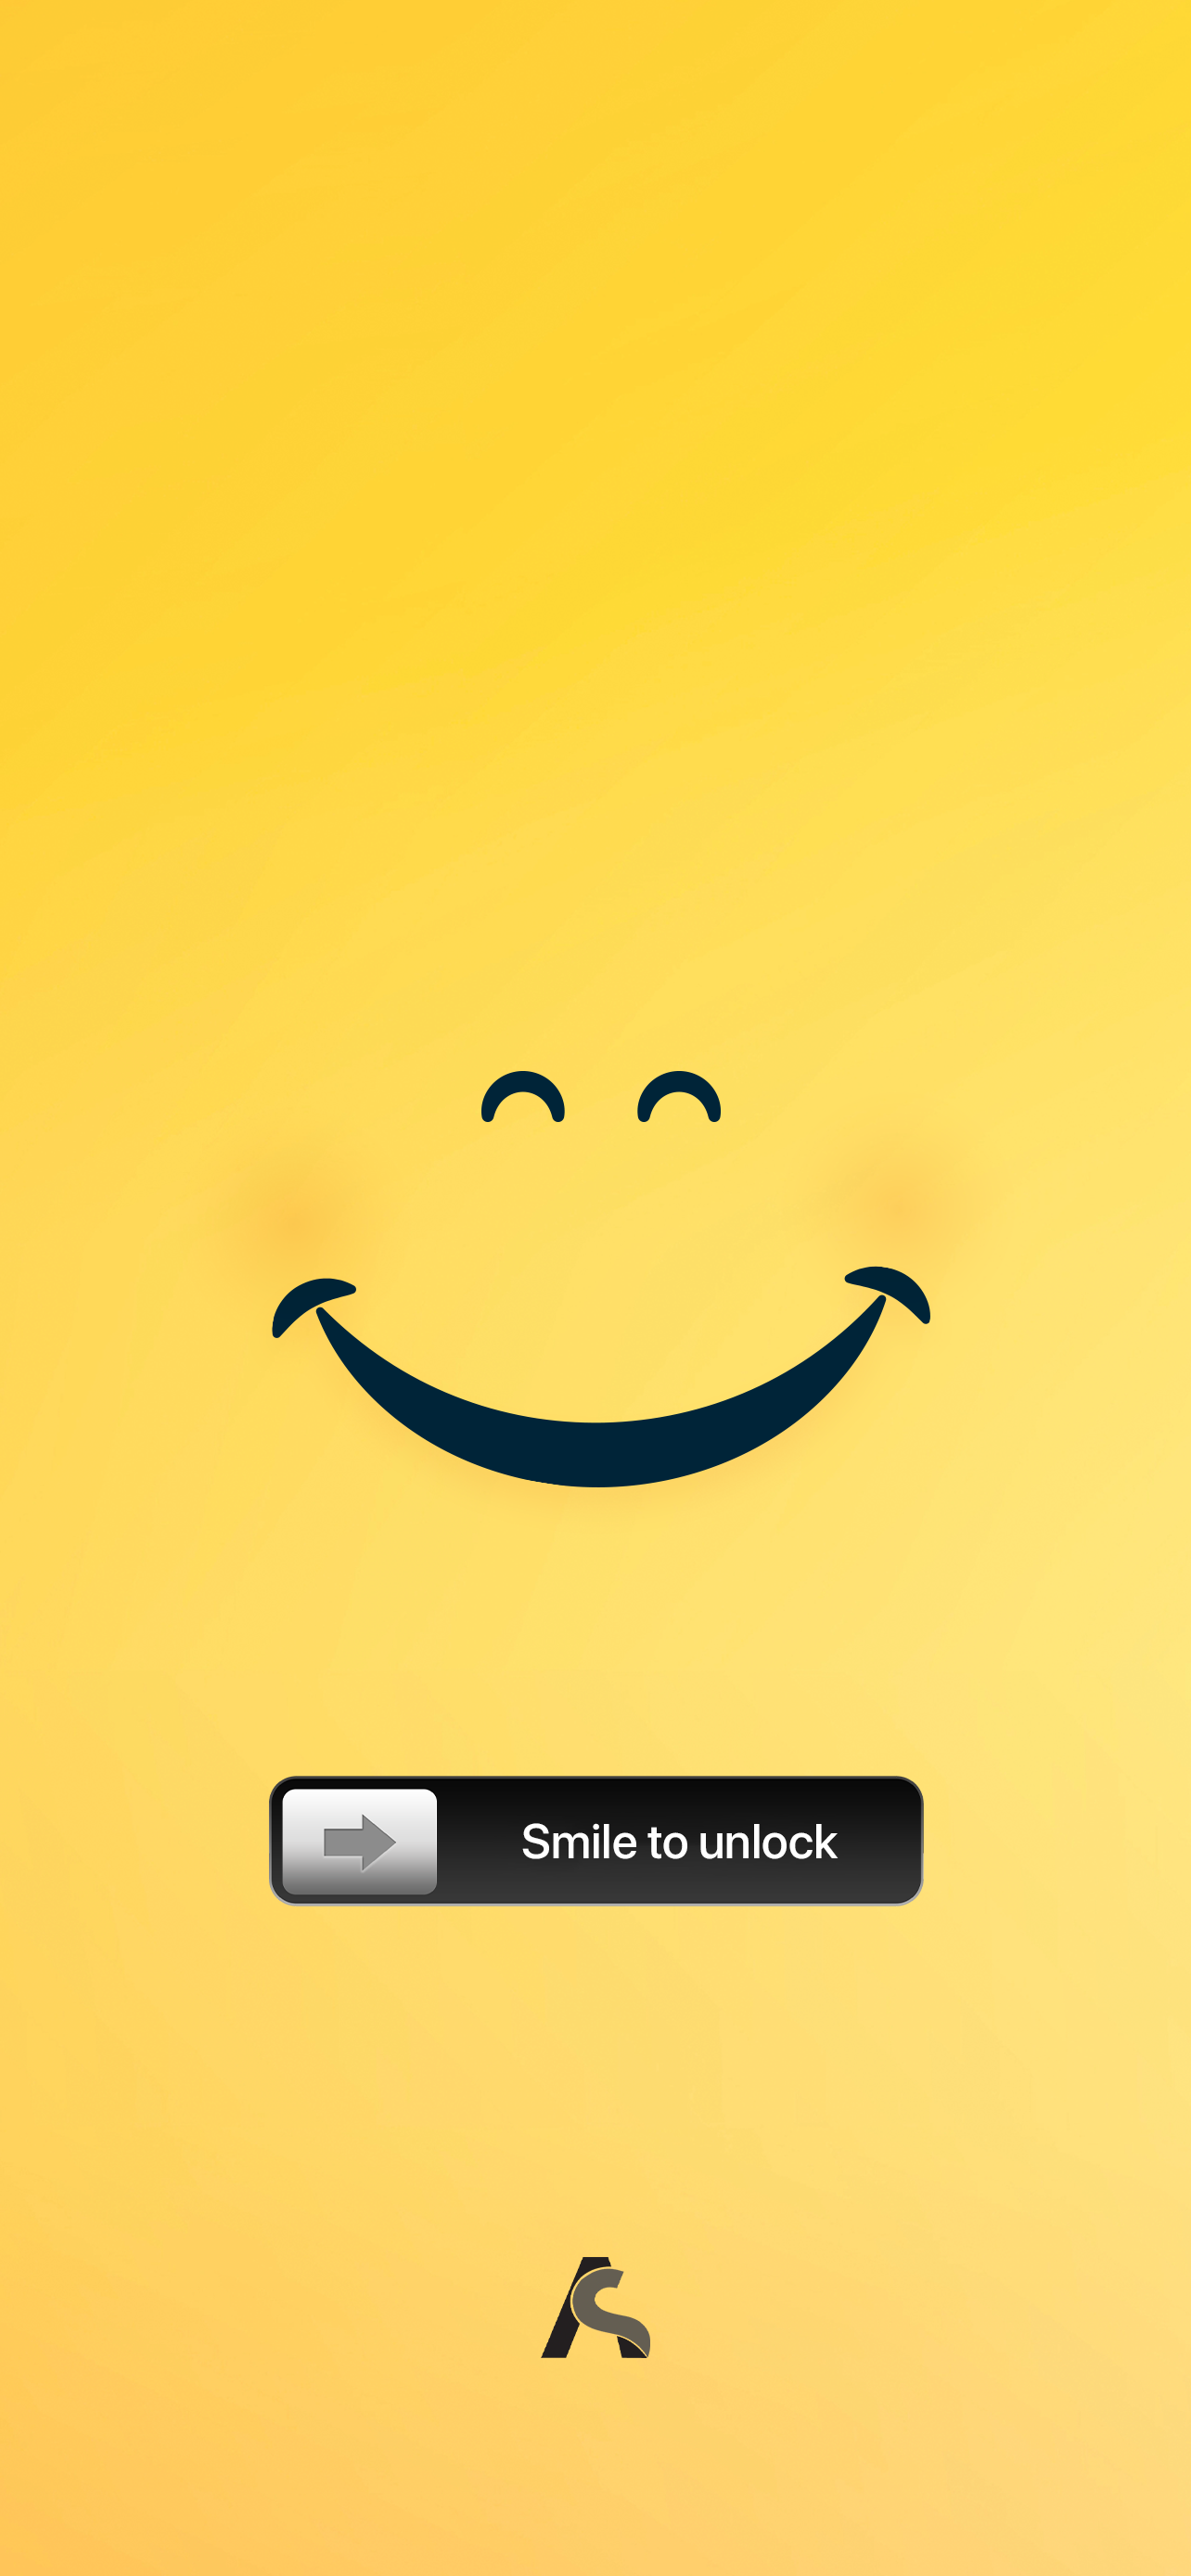 Smile Wallpapers - Top 17 Best Smile Wallpapers [ HQ ]